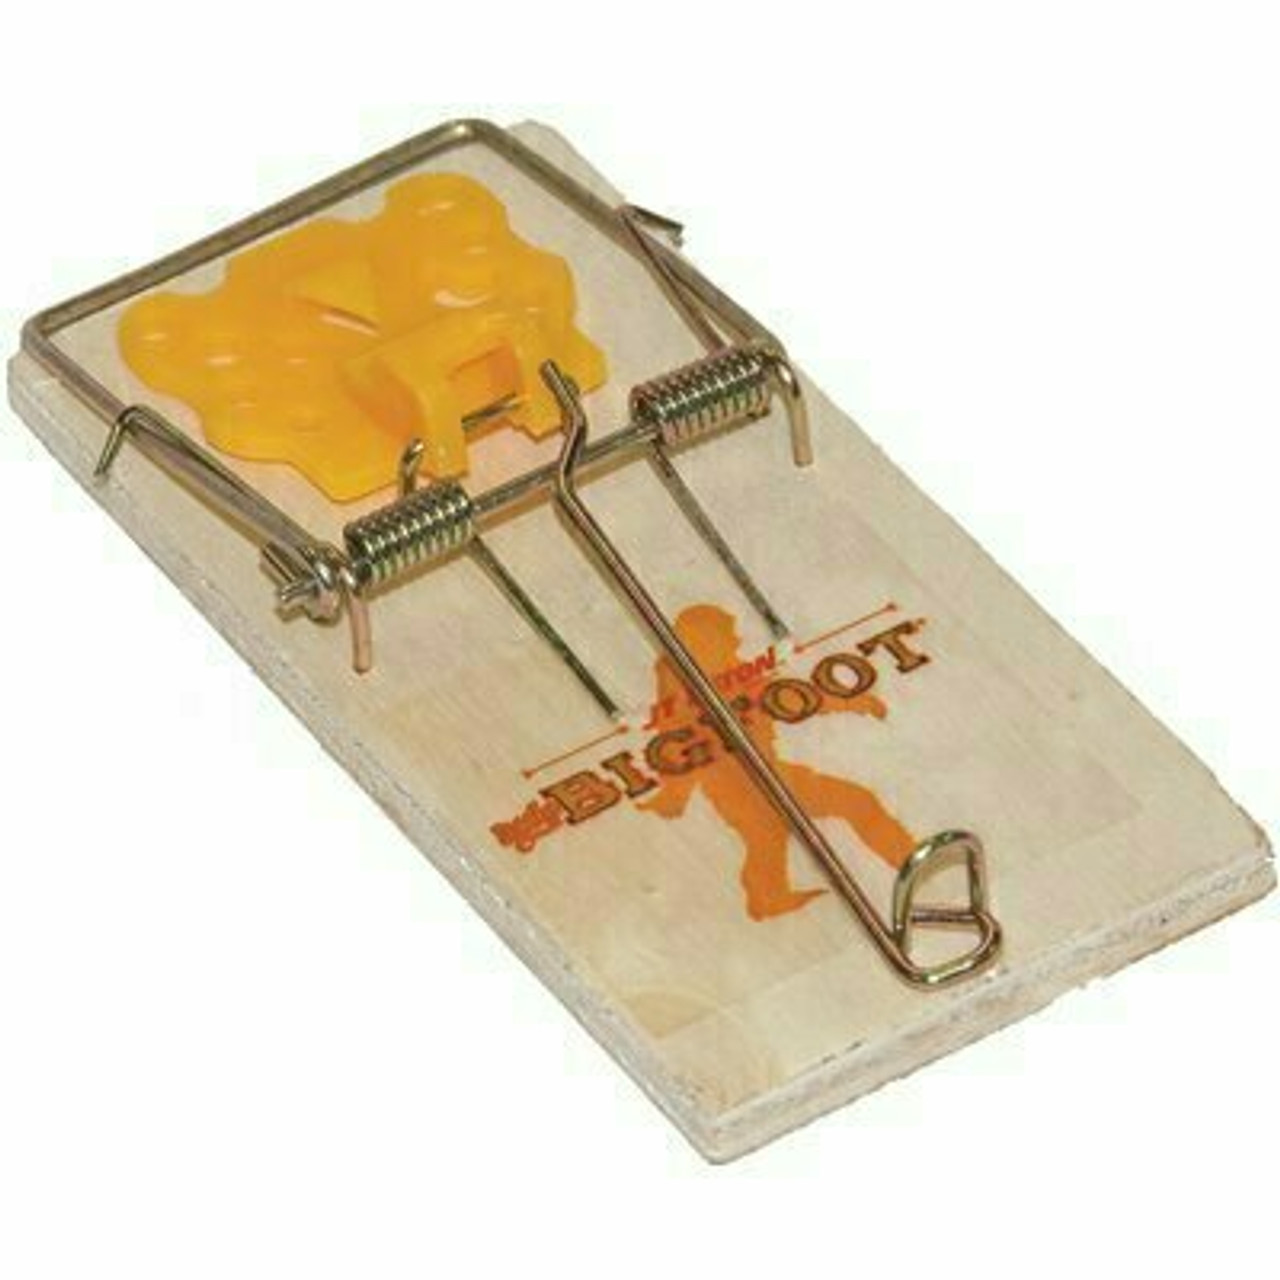 Jt Eaton Little Big Foot Mouse Size Snap Traps With Expanded Trigger (4-Pack)